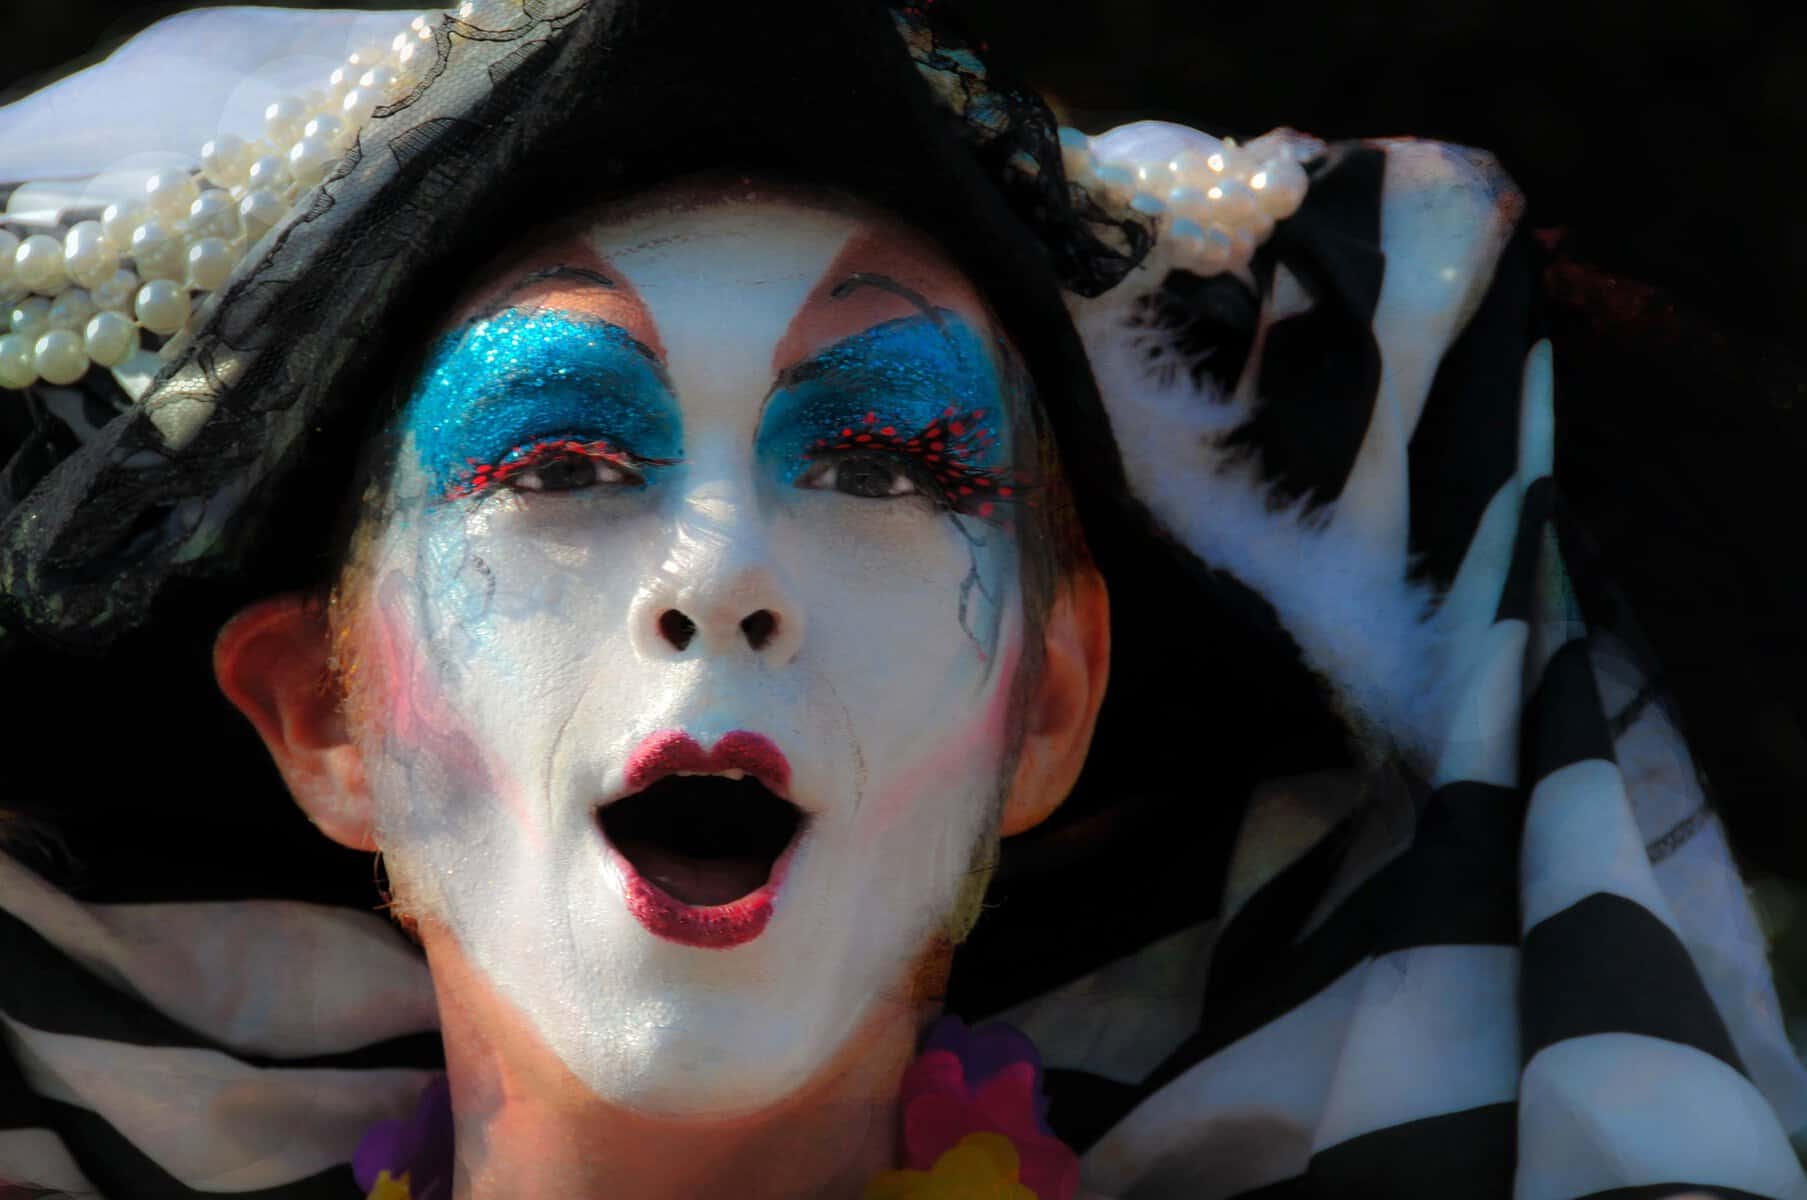 A performer with a heavily colored face like a mime is shown close up.